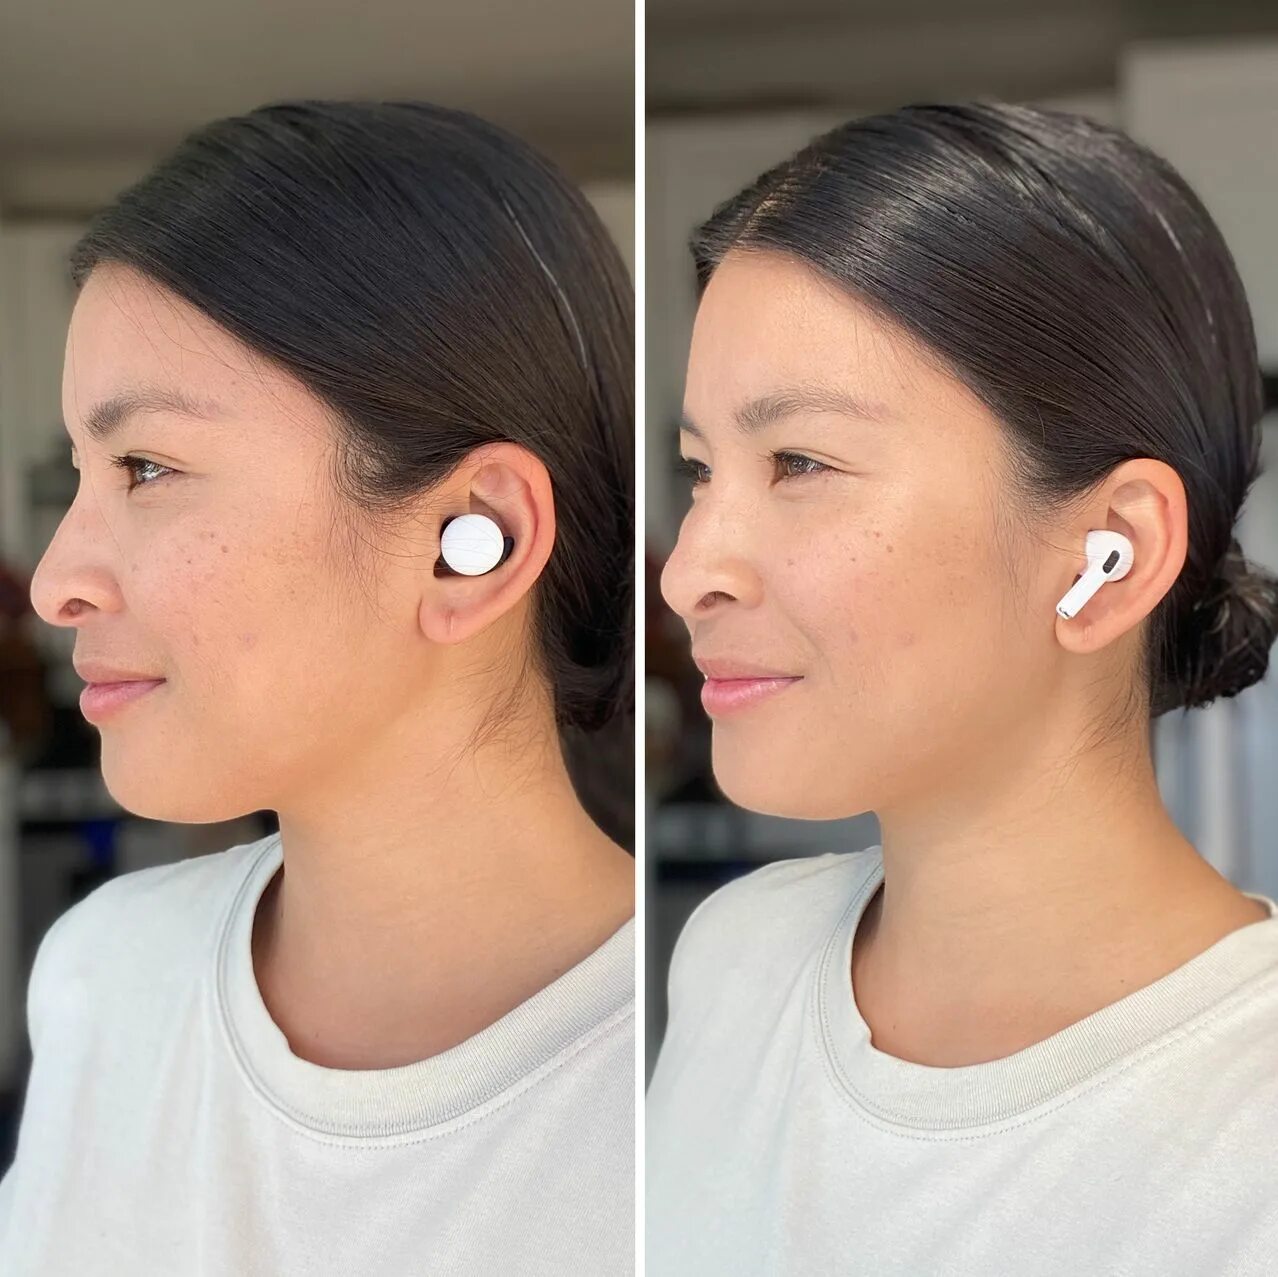 Buds pro airpods pro. Apple AIRPODS Pro в ушах. Pixel Buds Pro в ушах. Google Pixel Buds Pro в ушах. Pixel Buds Pro 2.